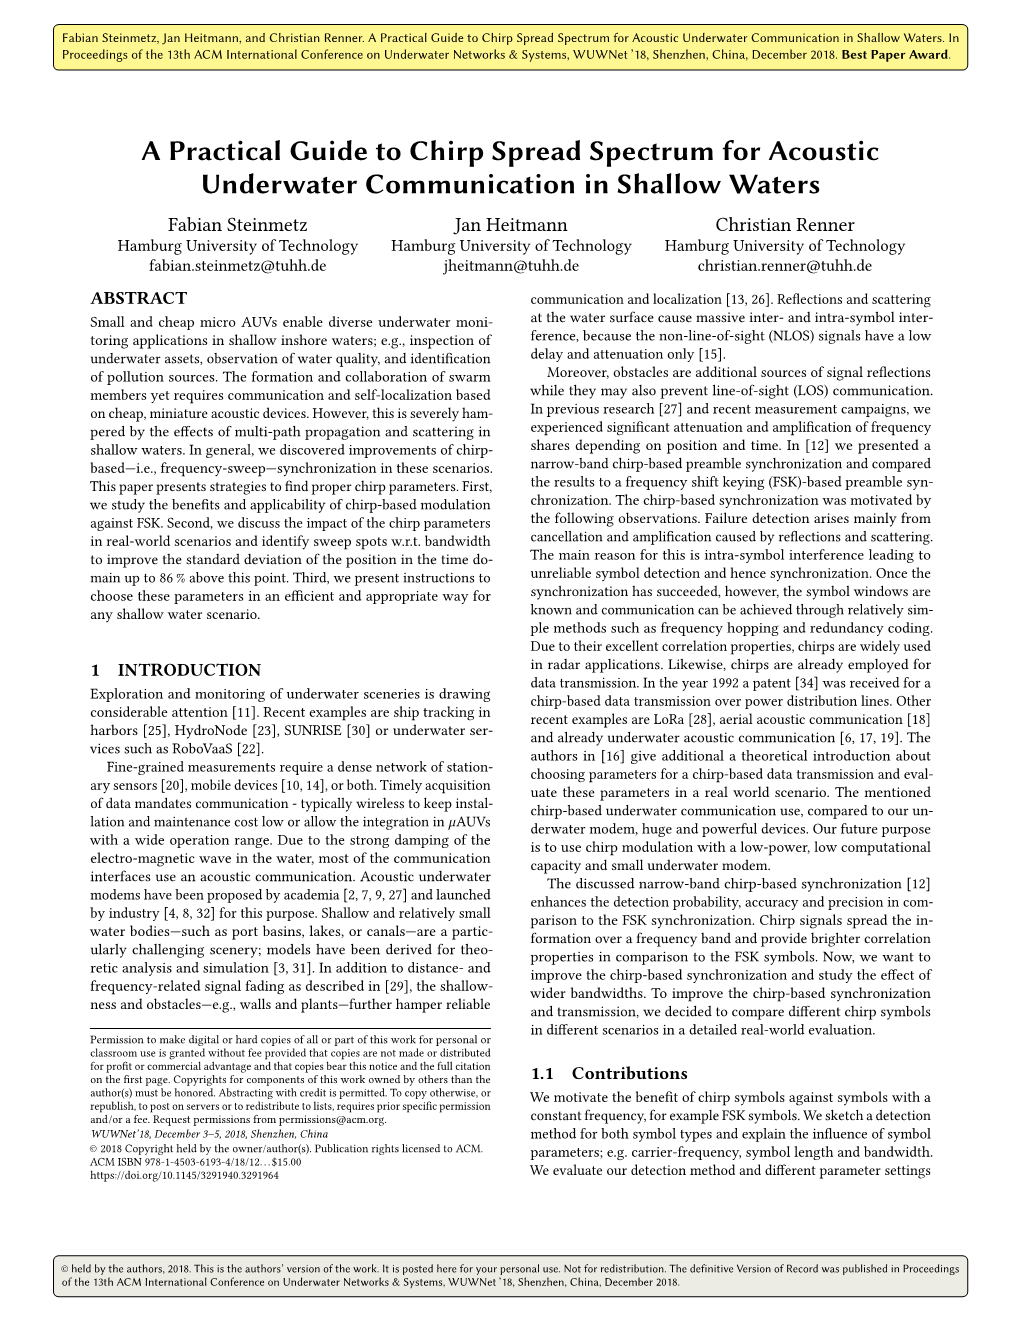 A Practical Guide to Chirp Spread Spectrum for Acoustic Underwater Communication in Shallow Waters